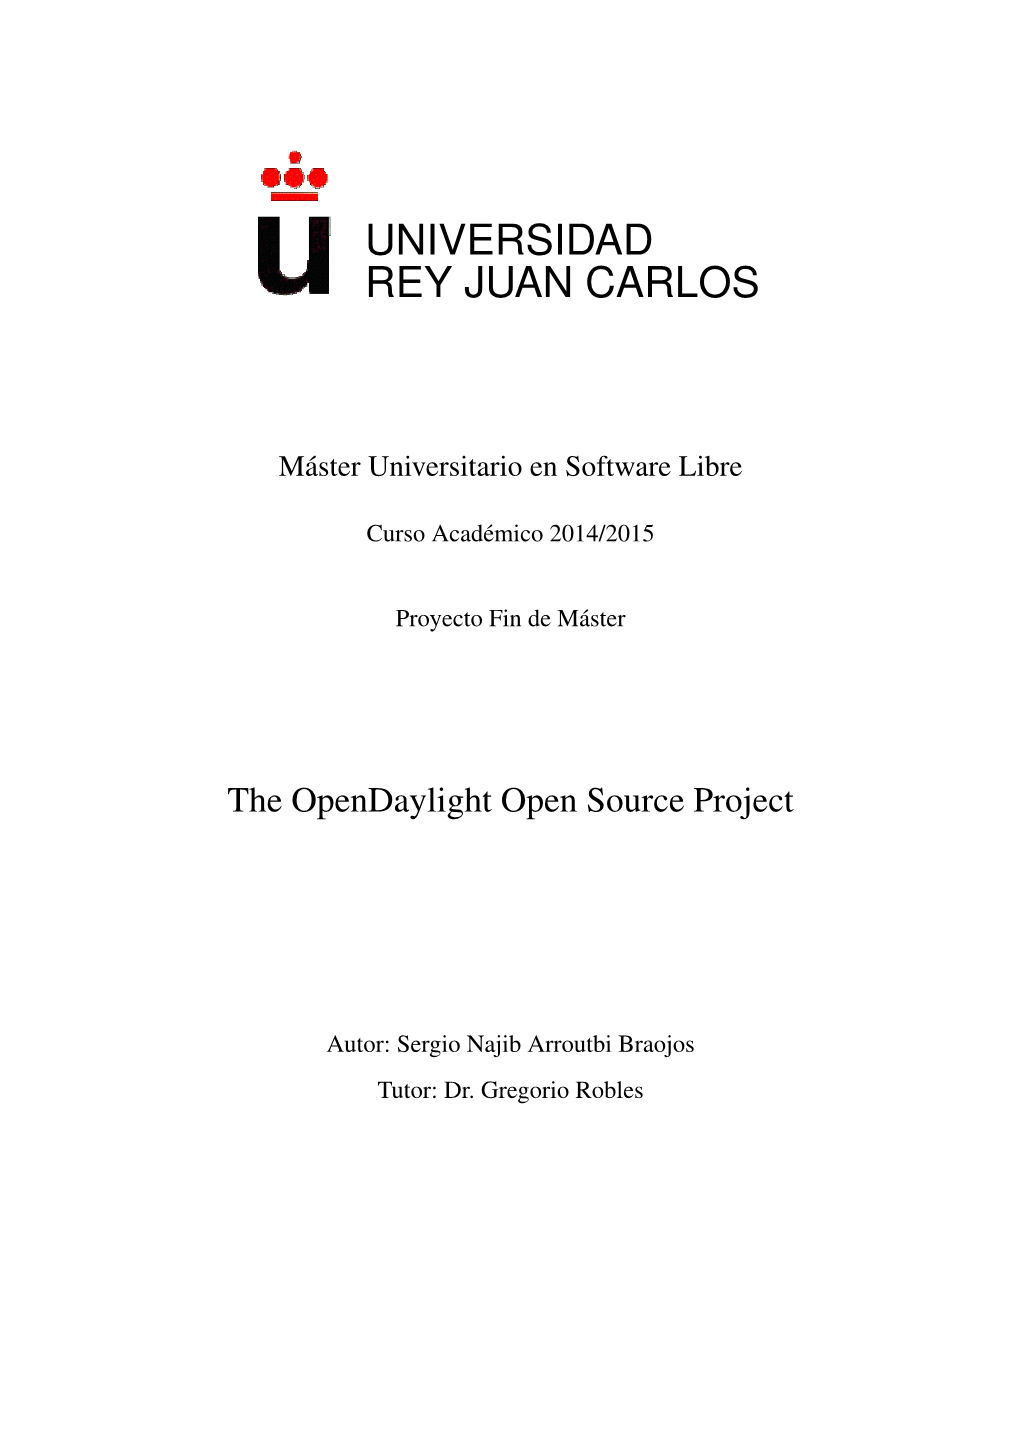 The Opendaylight Open Source Project